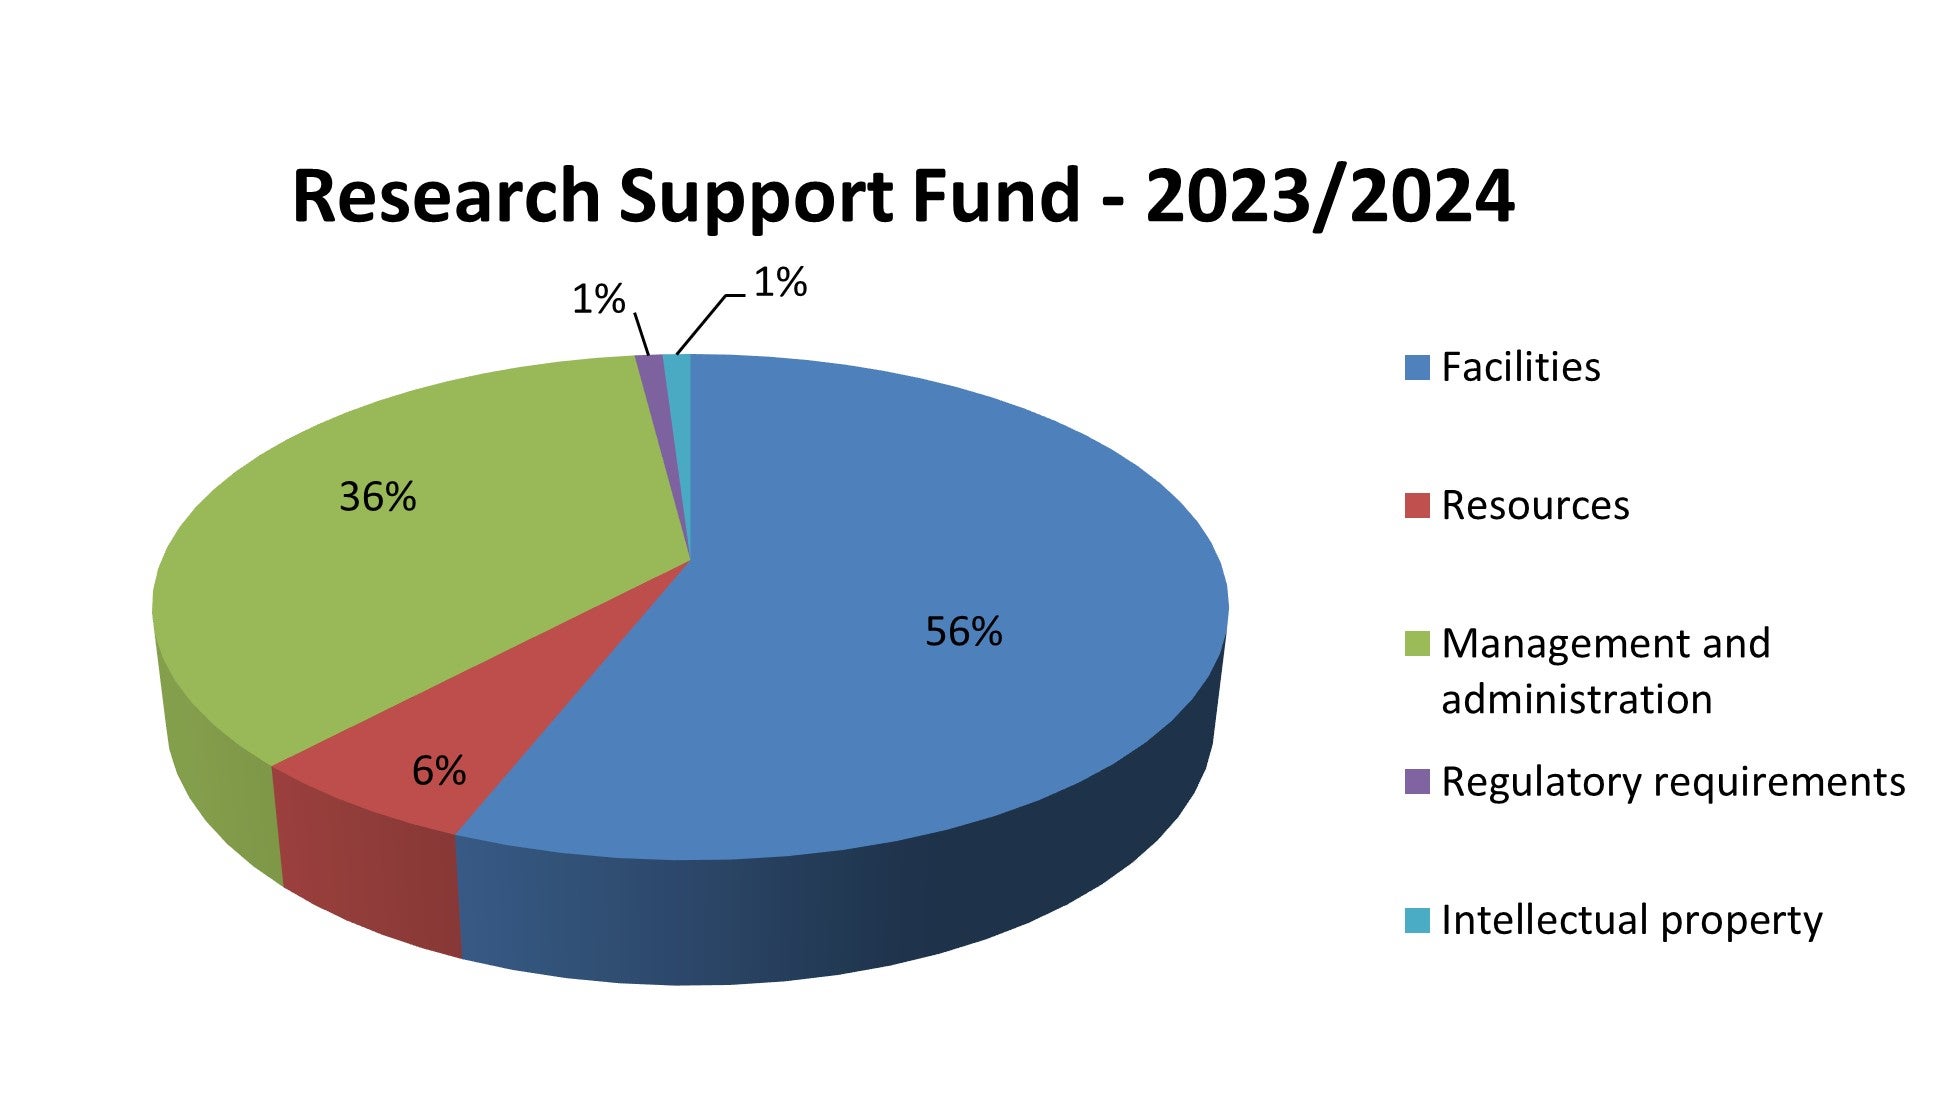 Research Support Fund - 2023/2024 pie chart with 5 segments: Facilities 56%, Resources 6%, Management and administration 36%, Regulatory requirements 1%, Intellectual property 1%